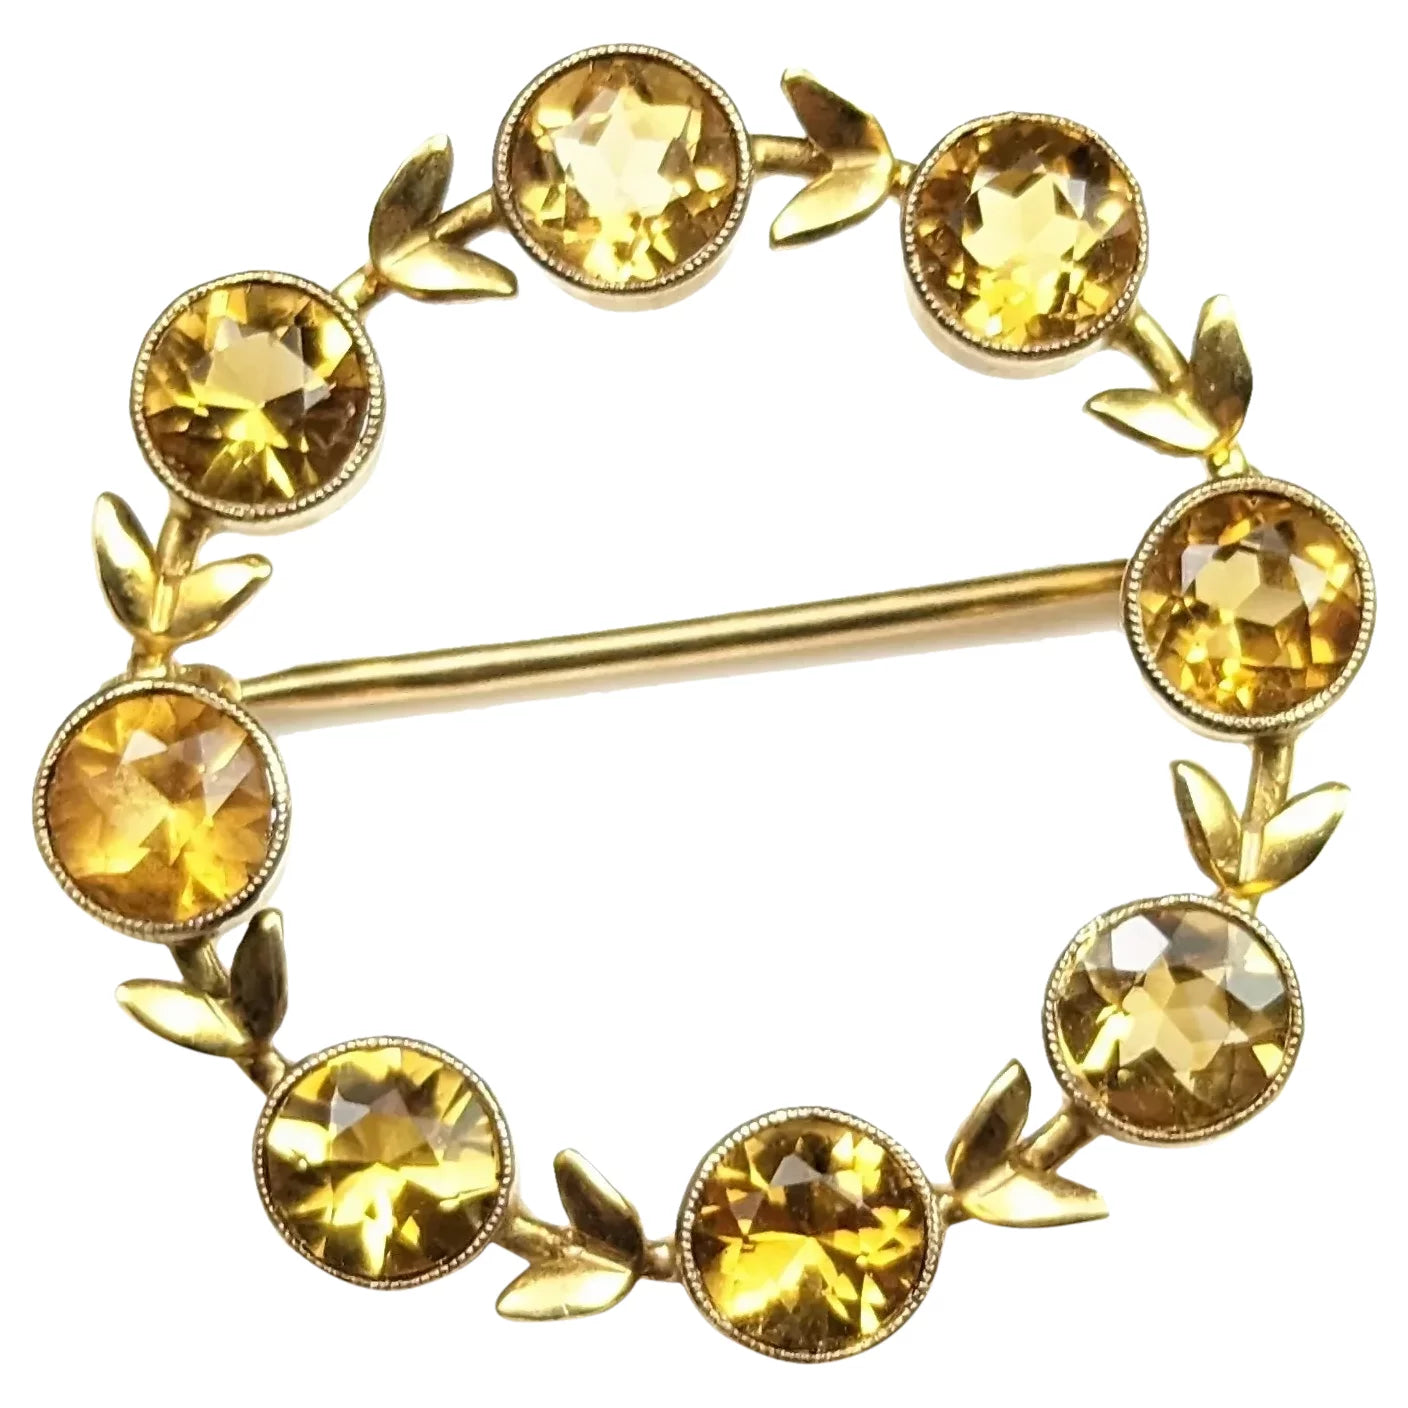 Vintage Citrine wreath brooch, 9ct gold, Cropp and Farr